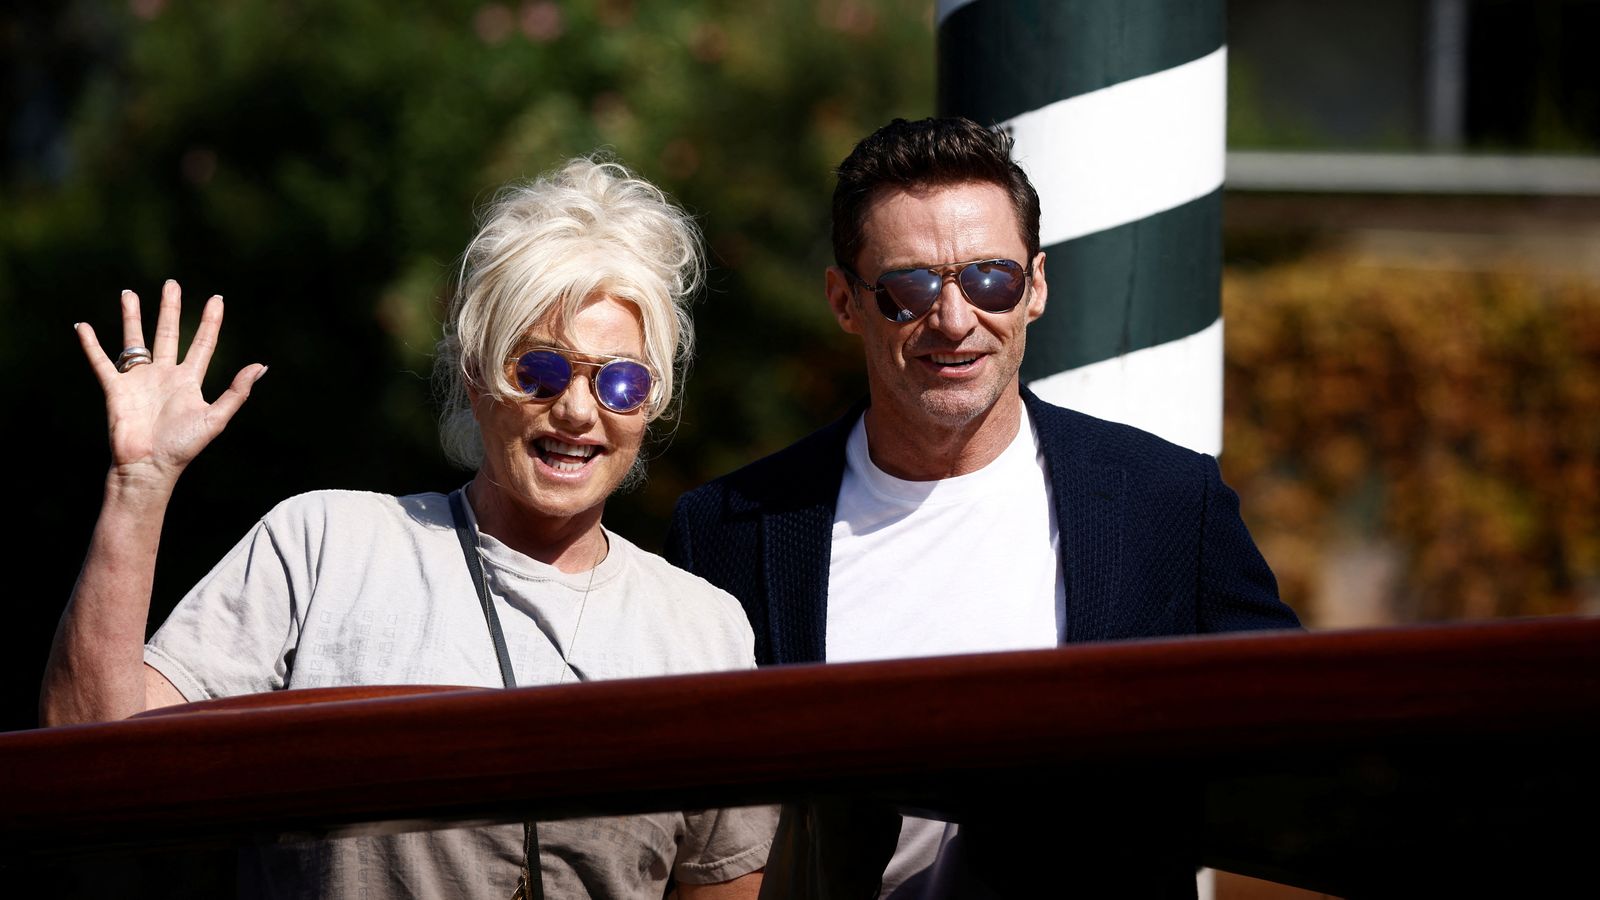 Hugh Jackman and his wife Deborra-Lee Furness separate after 27 years of marriage